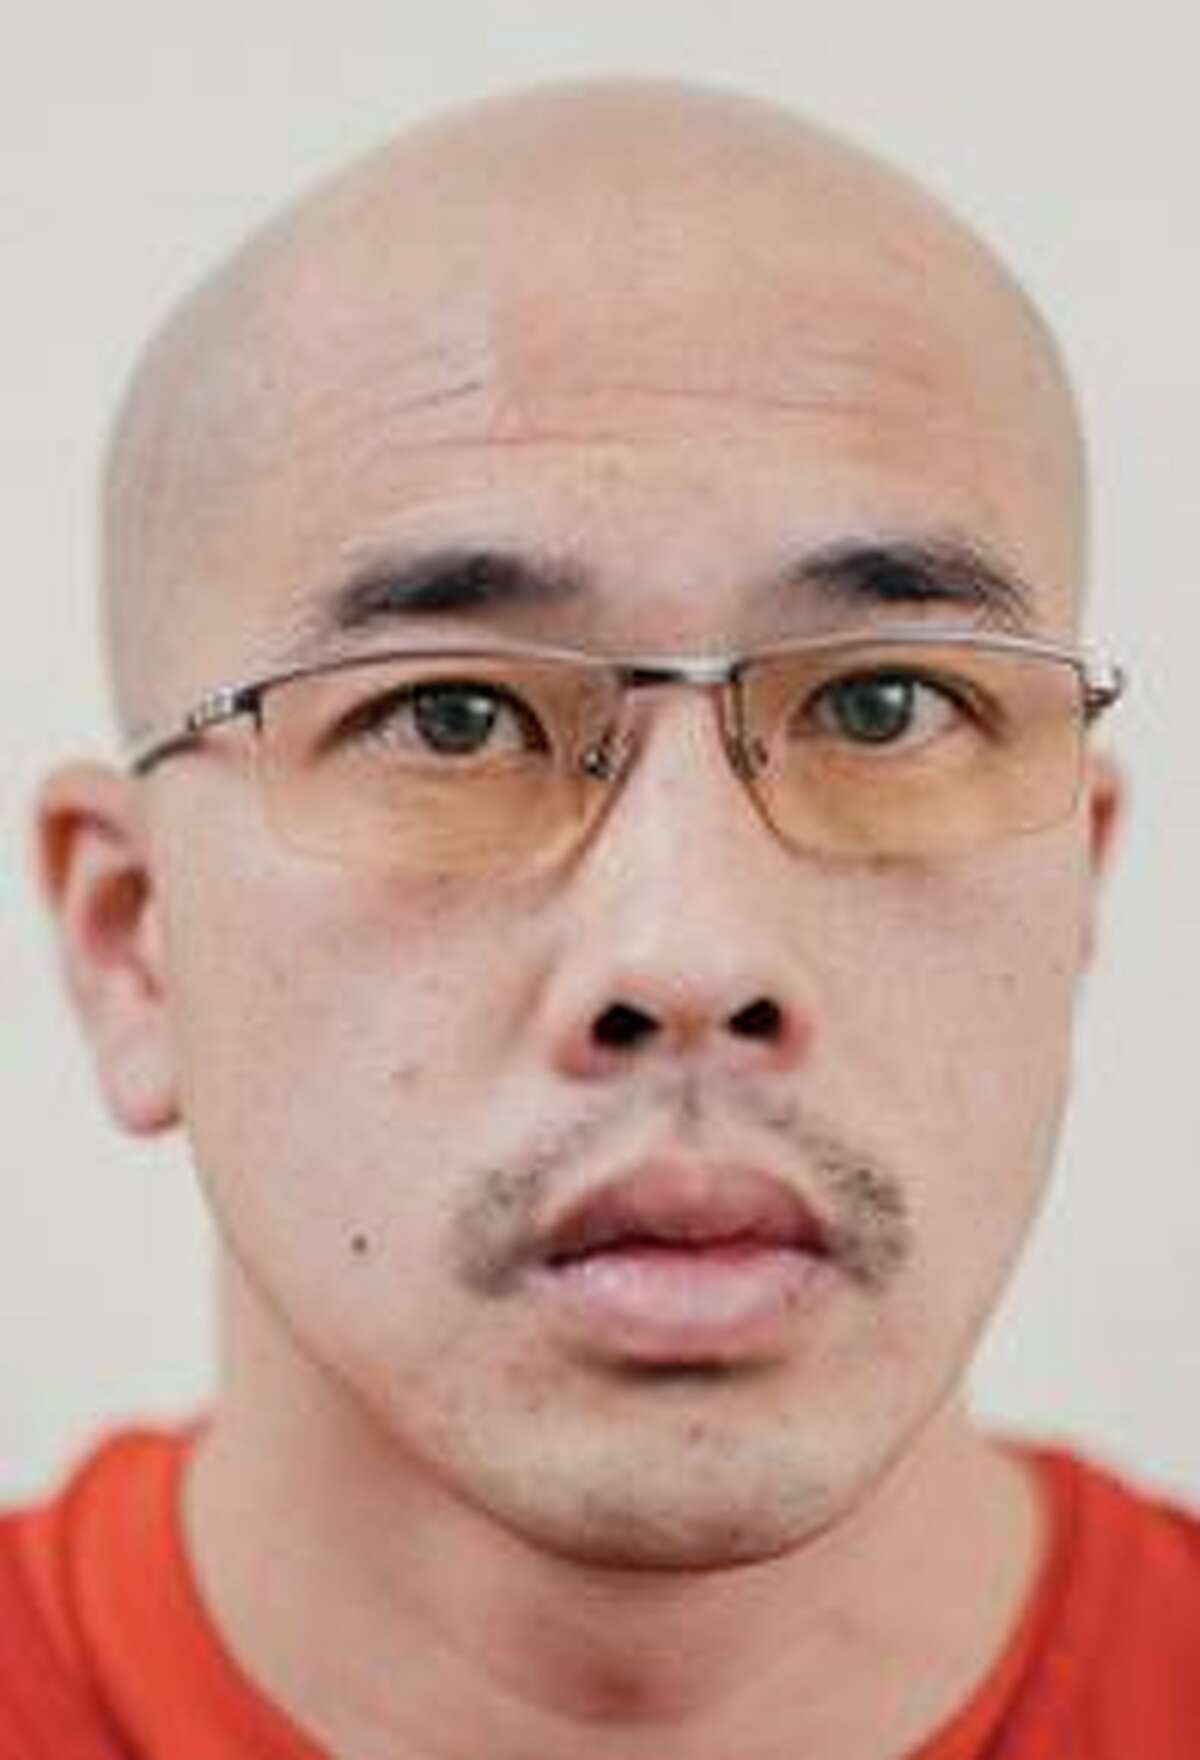 Phi Pham, who grew up in the East Bay, is being held in an ICE detention facility in Aurora, Colo.